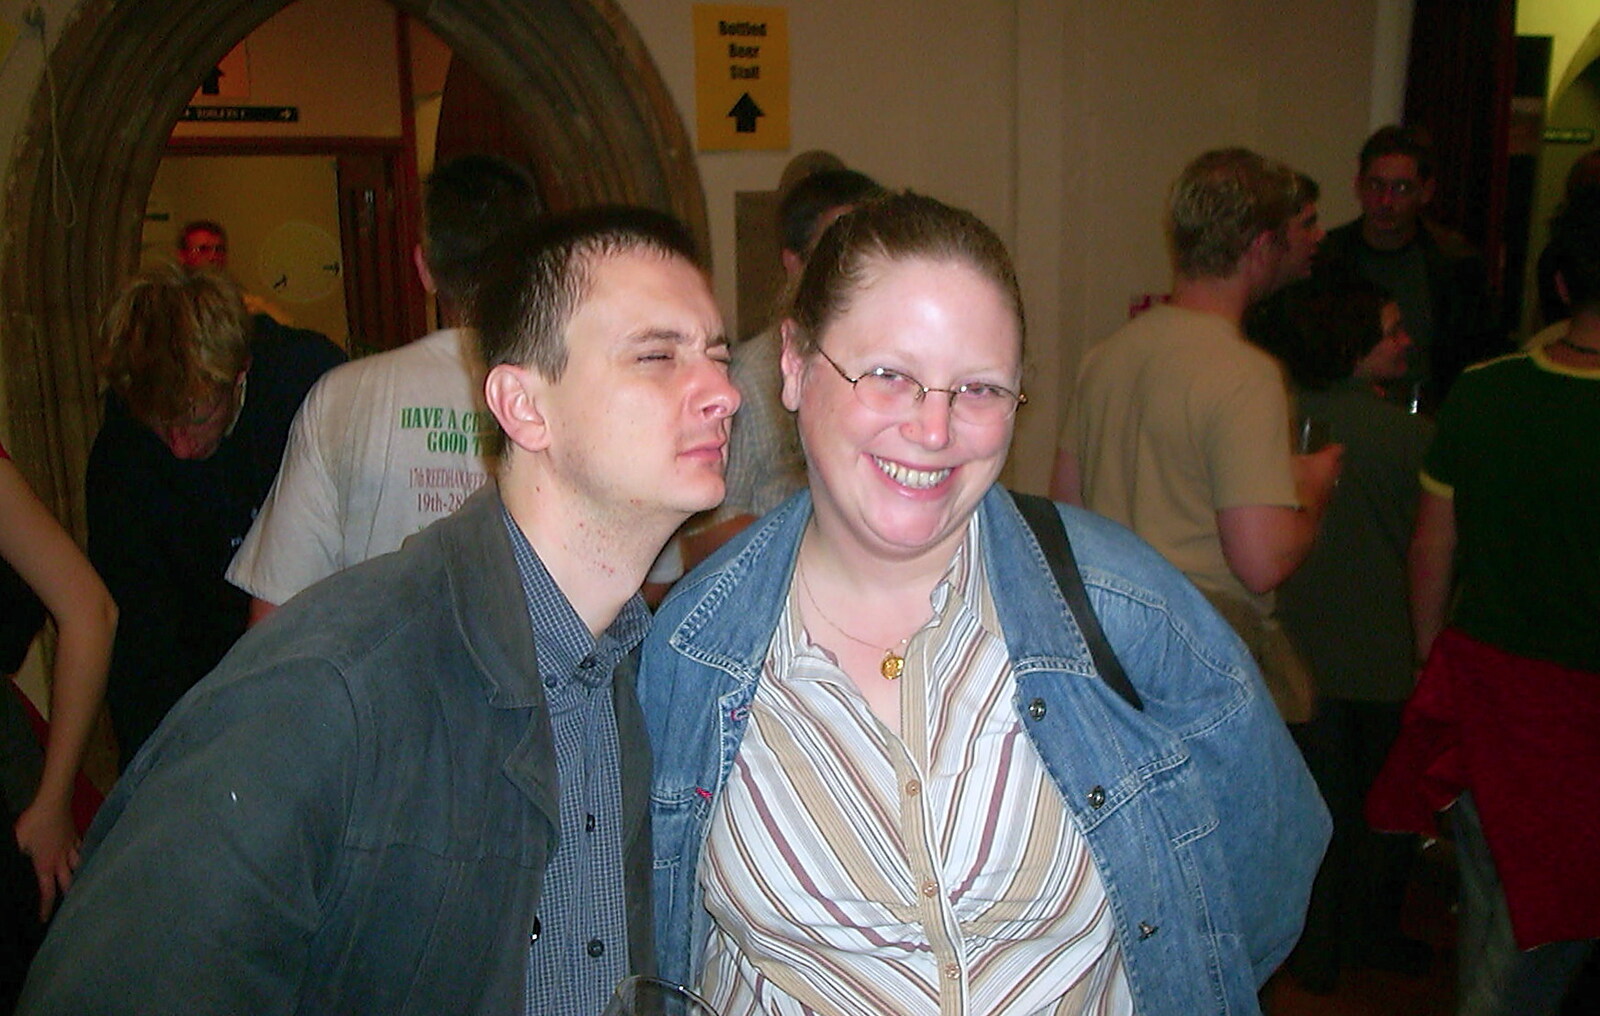 Andrew and Heidi from The Norwich Beer Festival, St. Andrew's Hall, Norwich - 26th October 2002